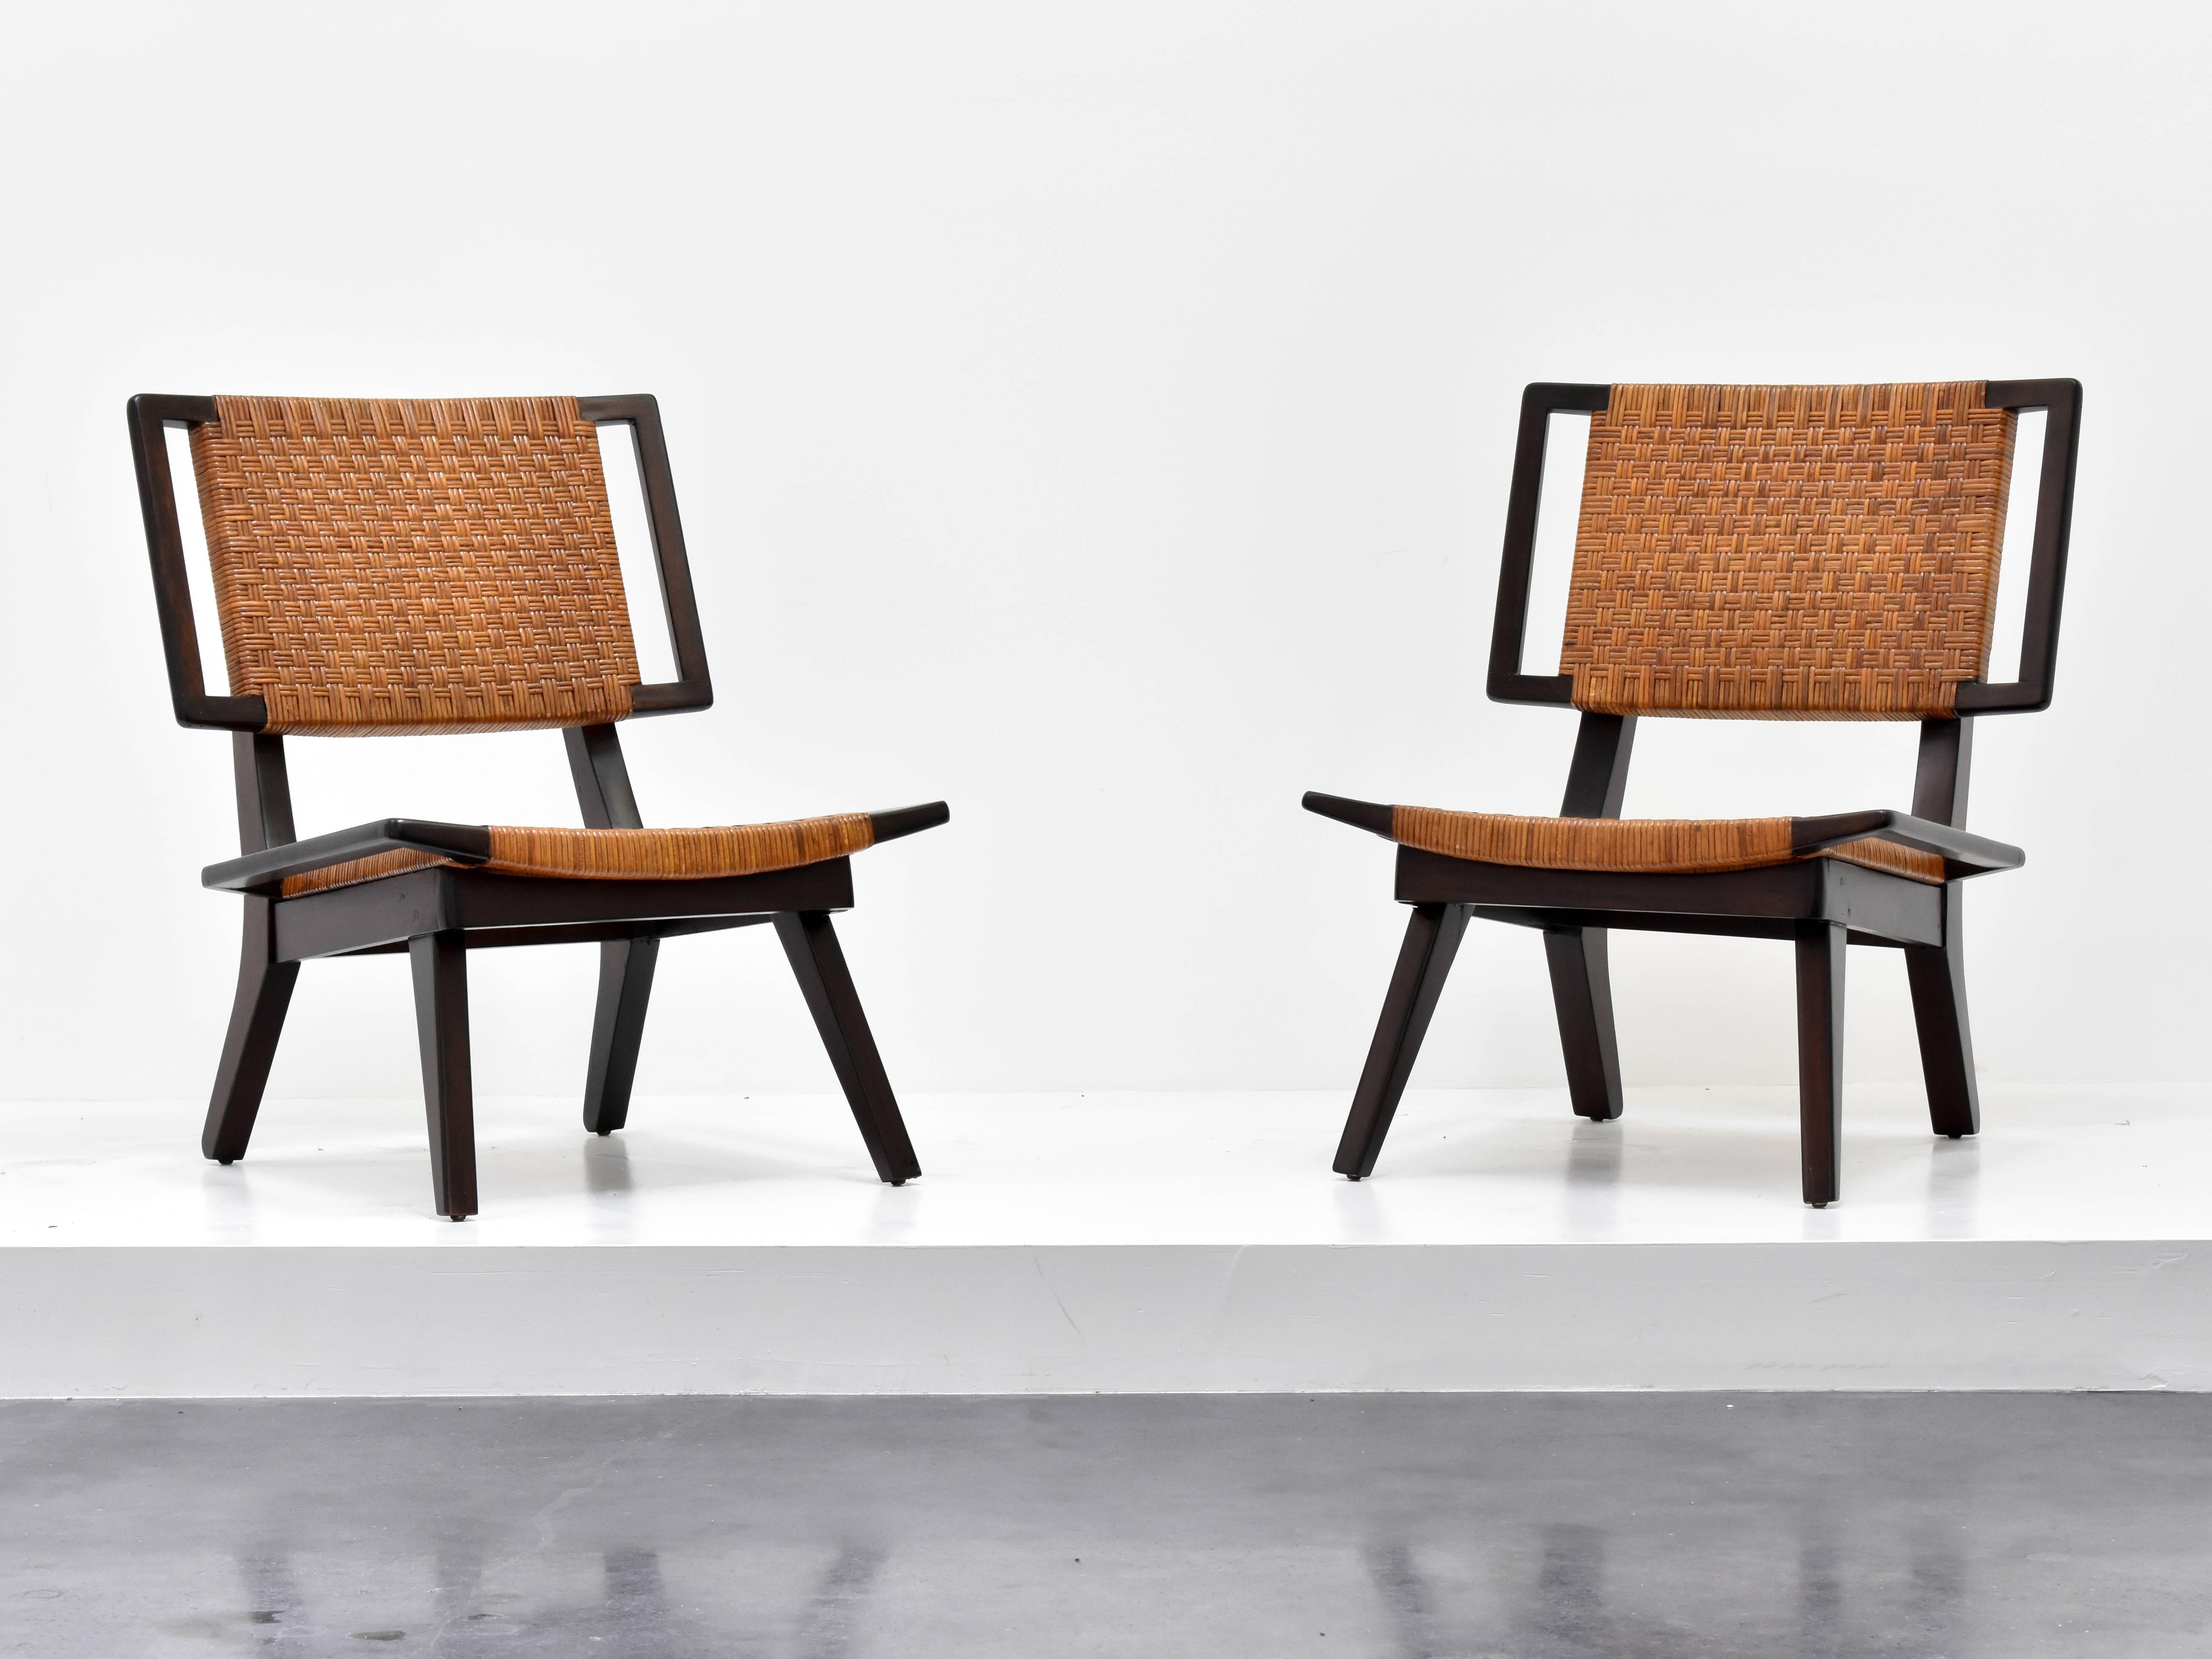 A pair of lounge chairs in the style of Paul László for Glenn of California. Dark stained mahogany and original woven rattan. Two pairs are available, as well as a settee. 

Paul László is considered among the most important California-based